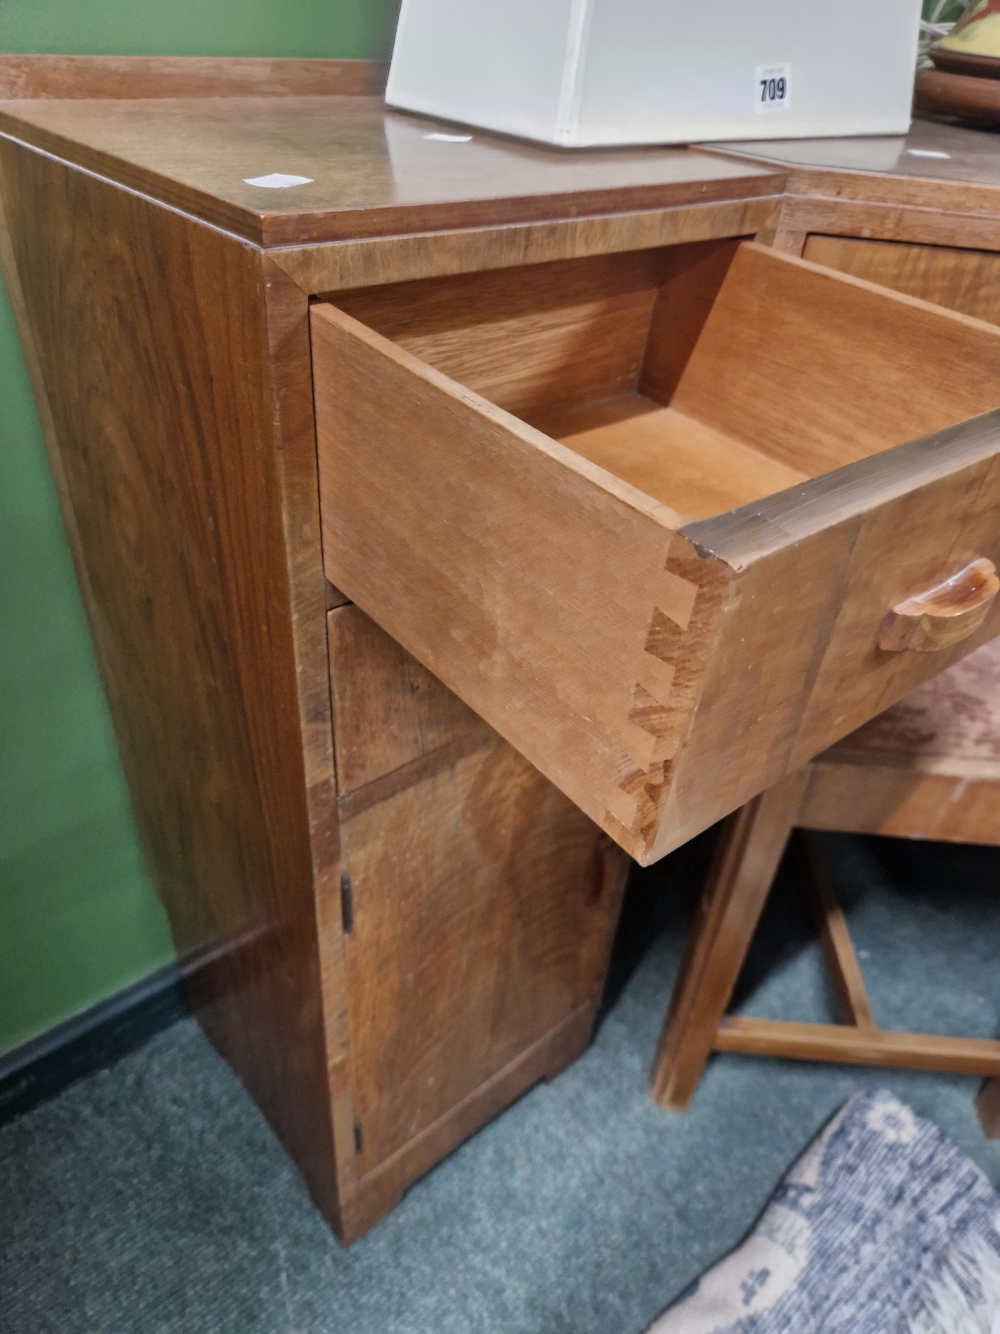 AN ART DECO WALNUT CORNER DRESSING TABLE AND STOOL TOGETHER WITH A TALLBOY CABINET - Image 7 of 31